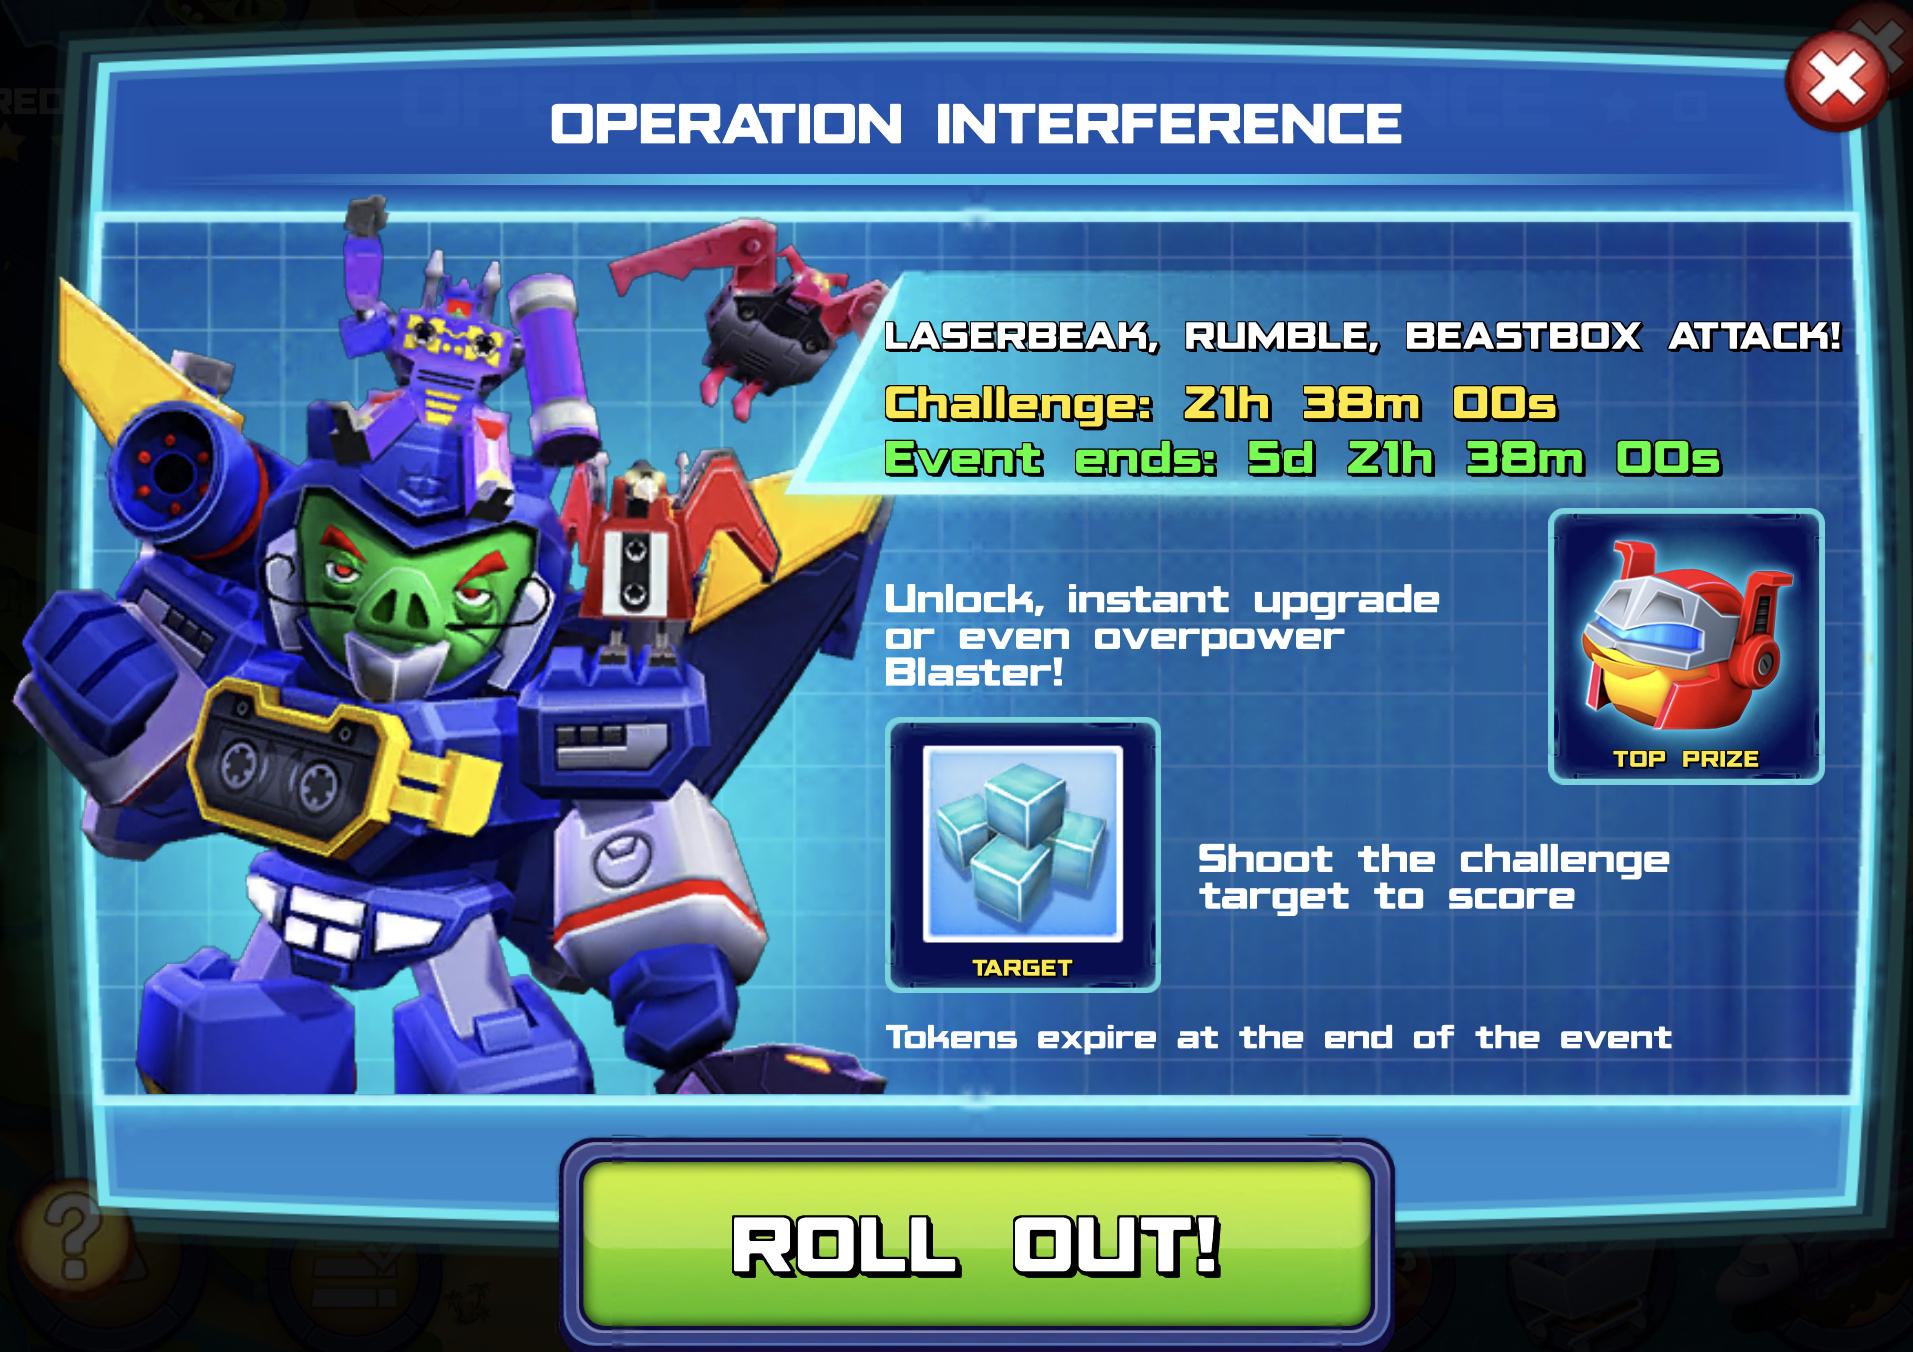 Banner for an Operation Interference weekly event